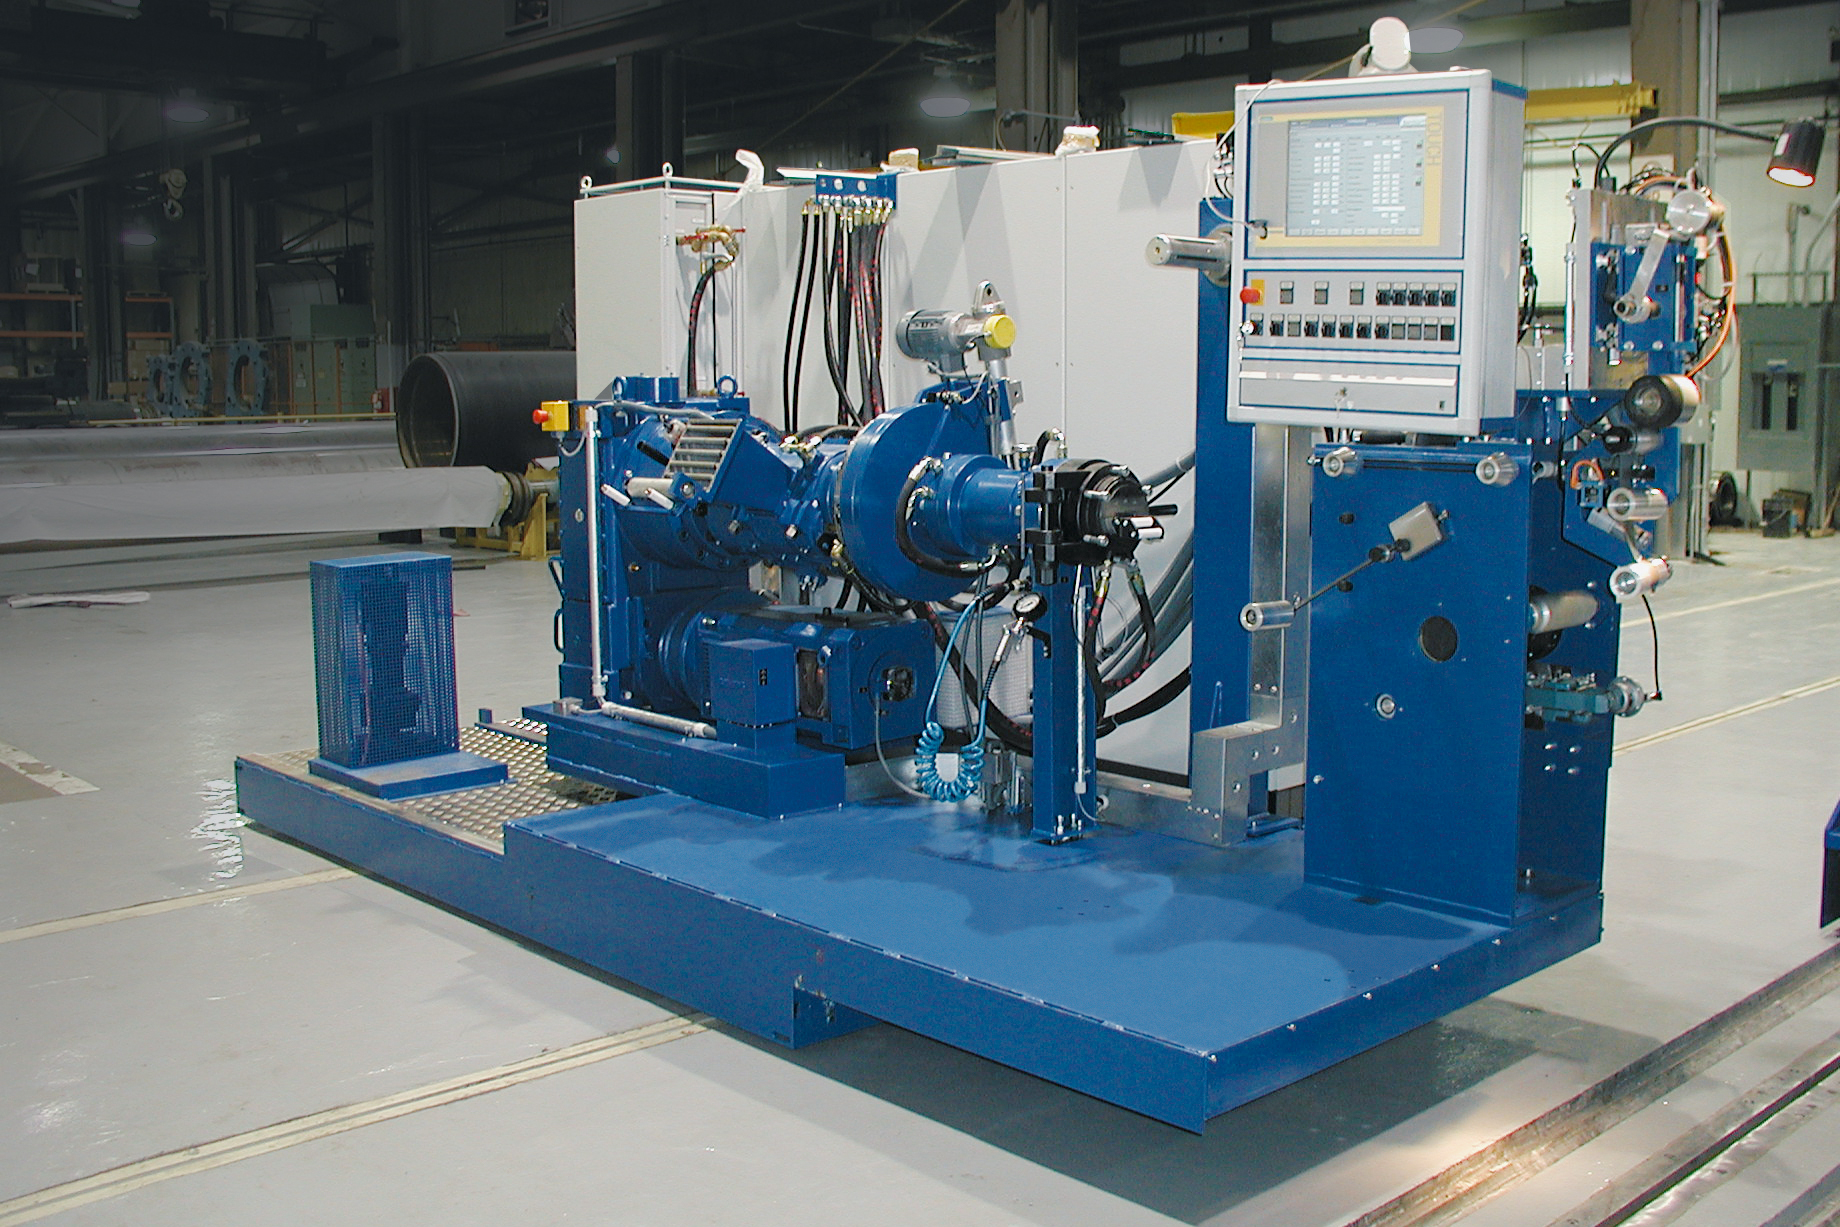 Strip winding systems